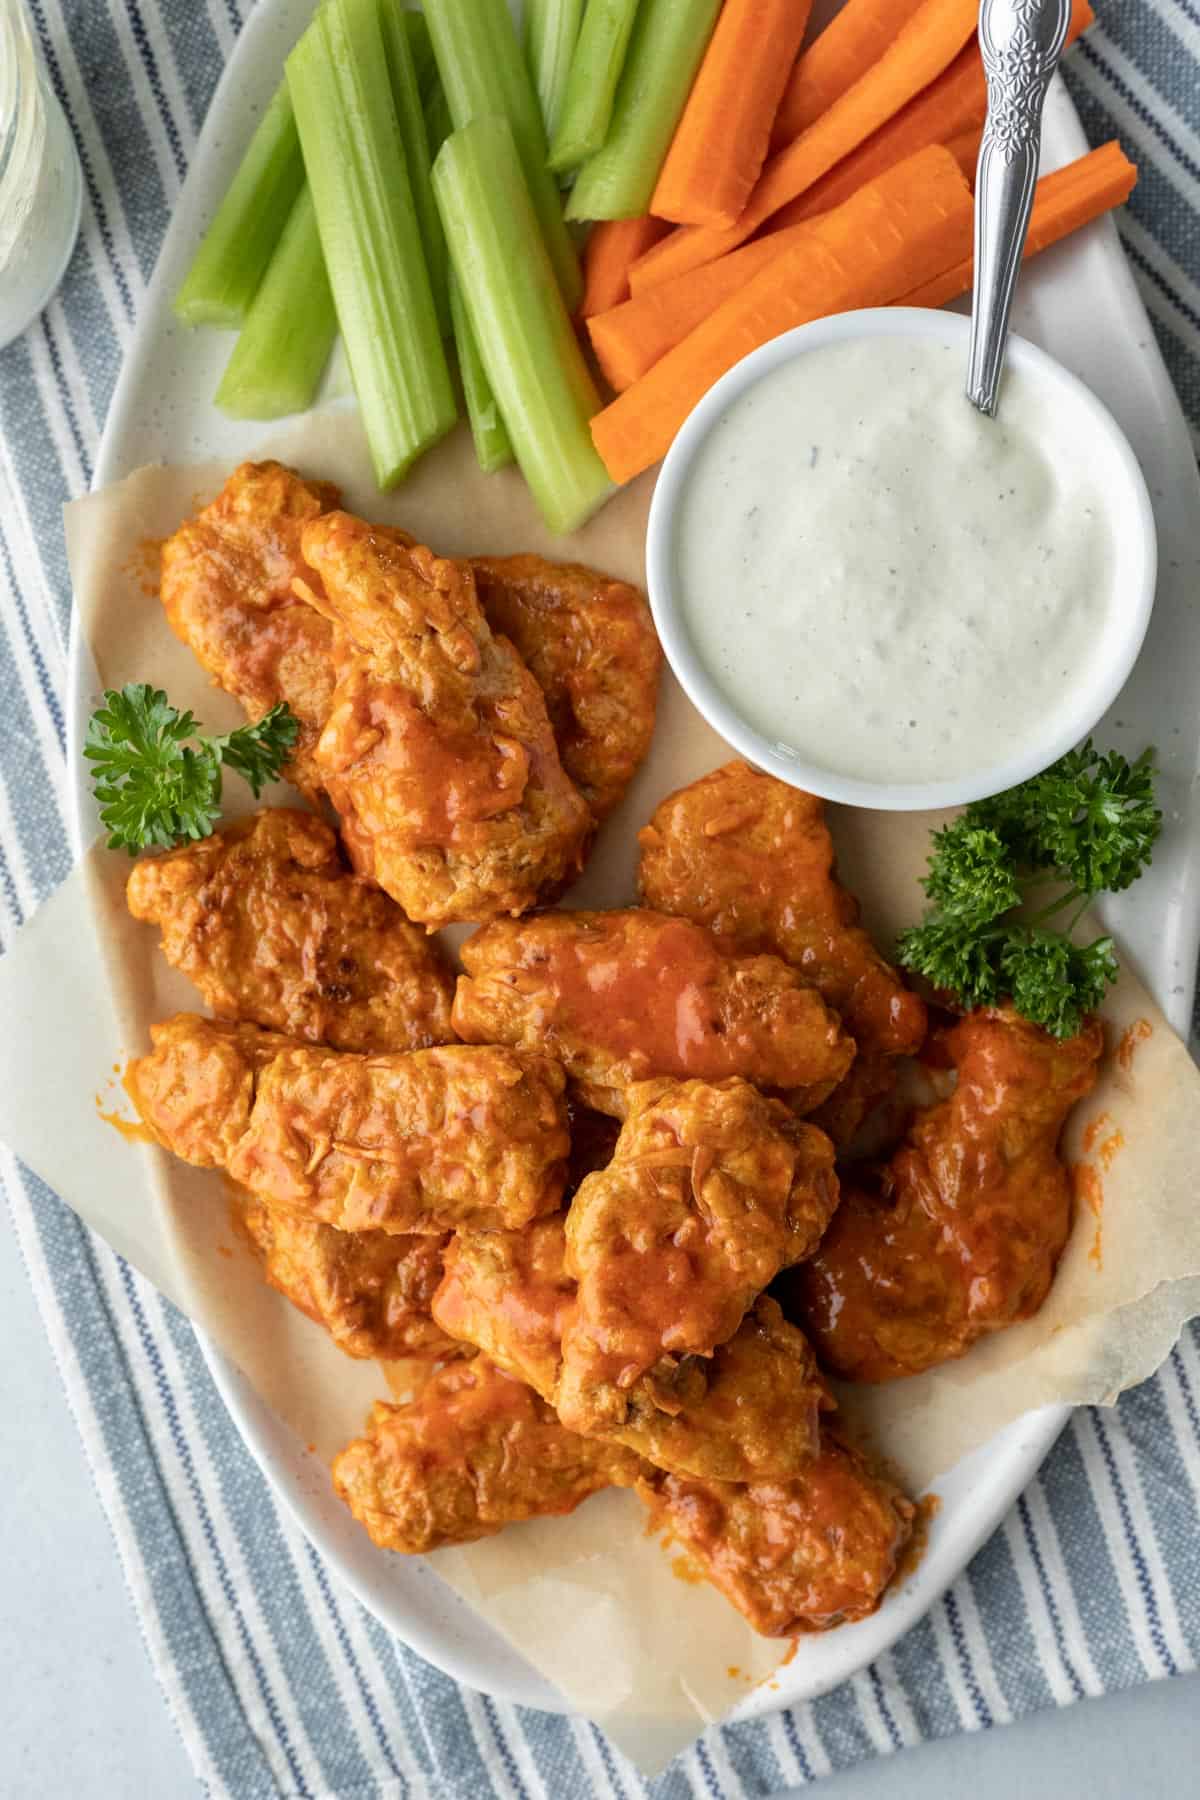 Vegan chicken wings coated in sauce on a platter with vegan ranch, celery, and carrots.